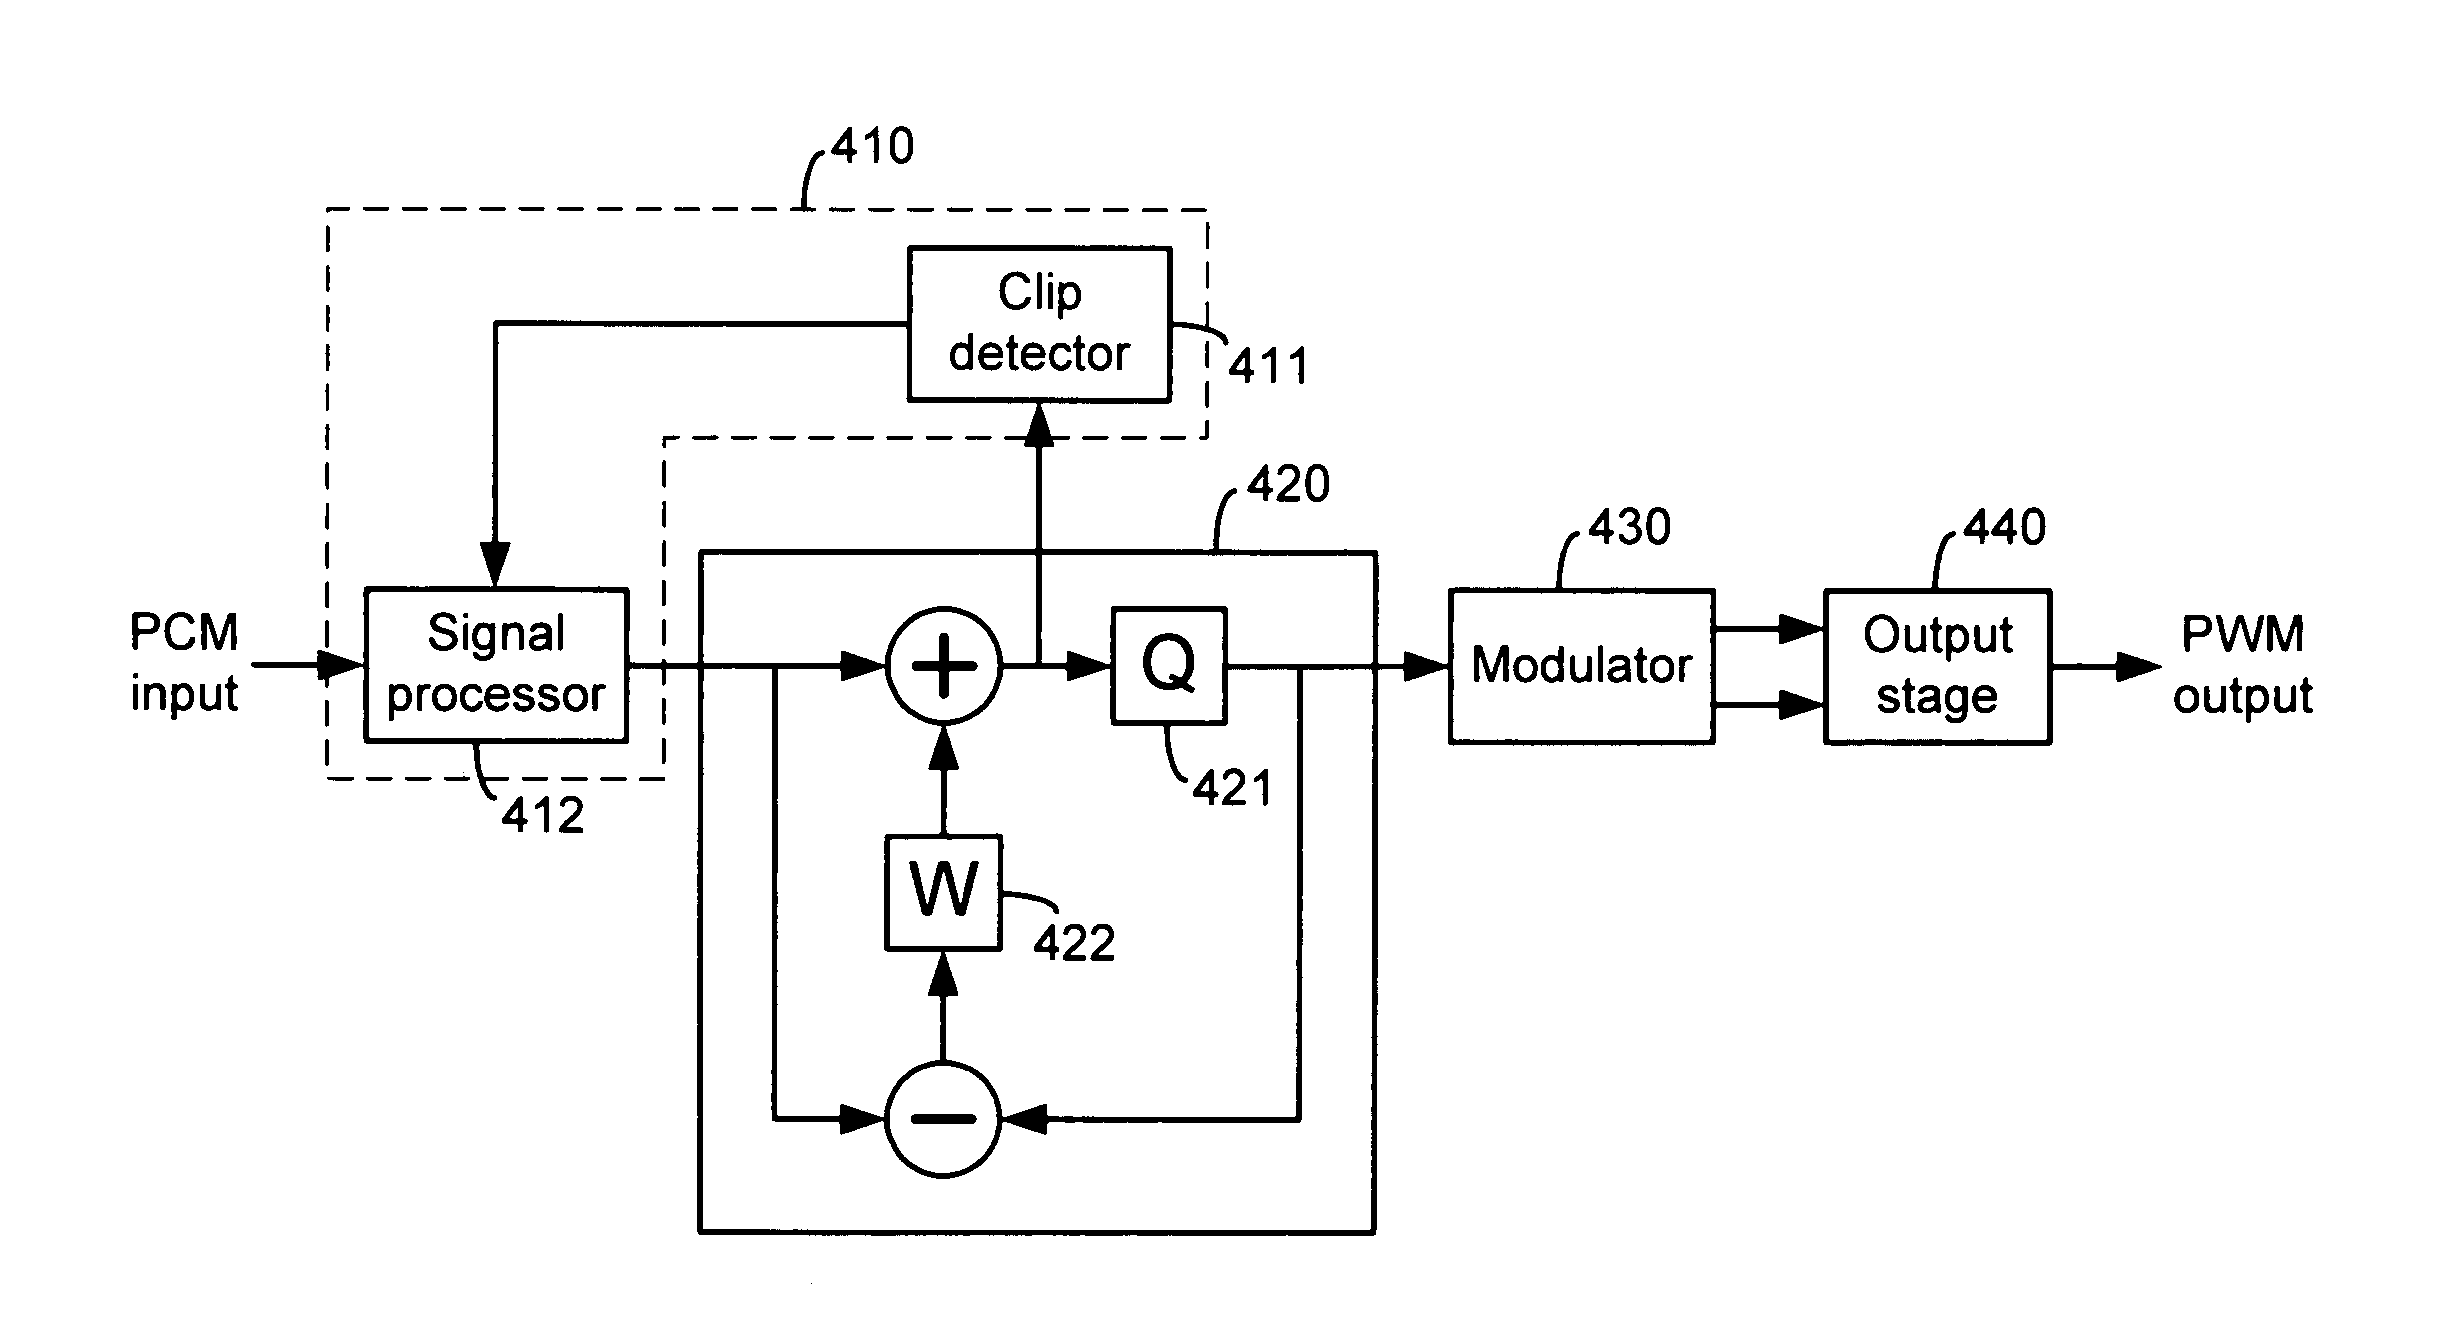 Clip detection in PWM amplifier